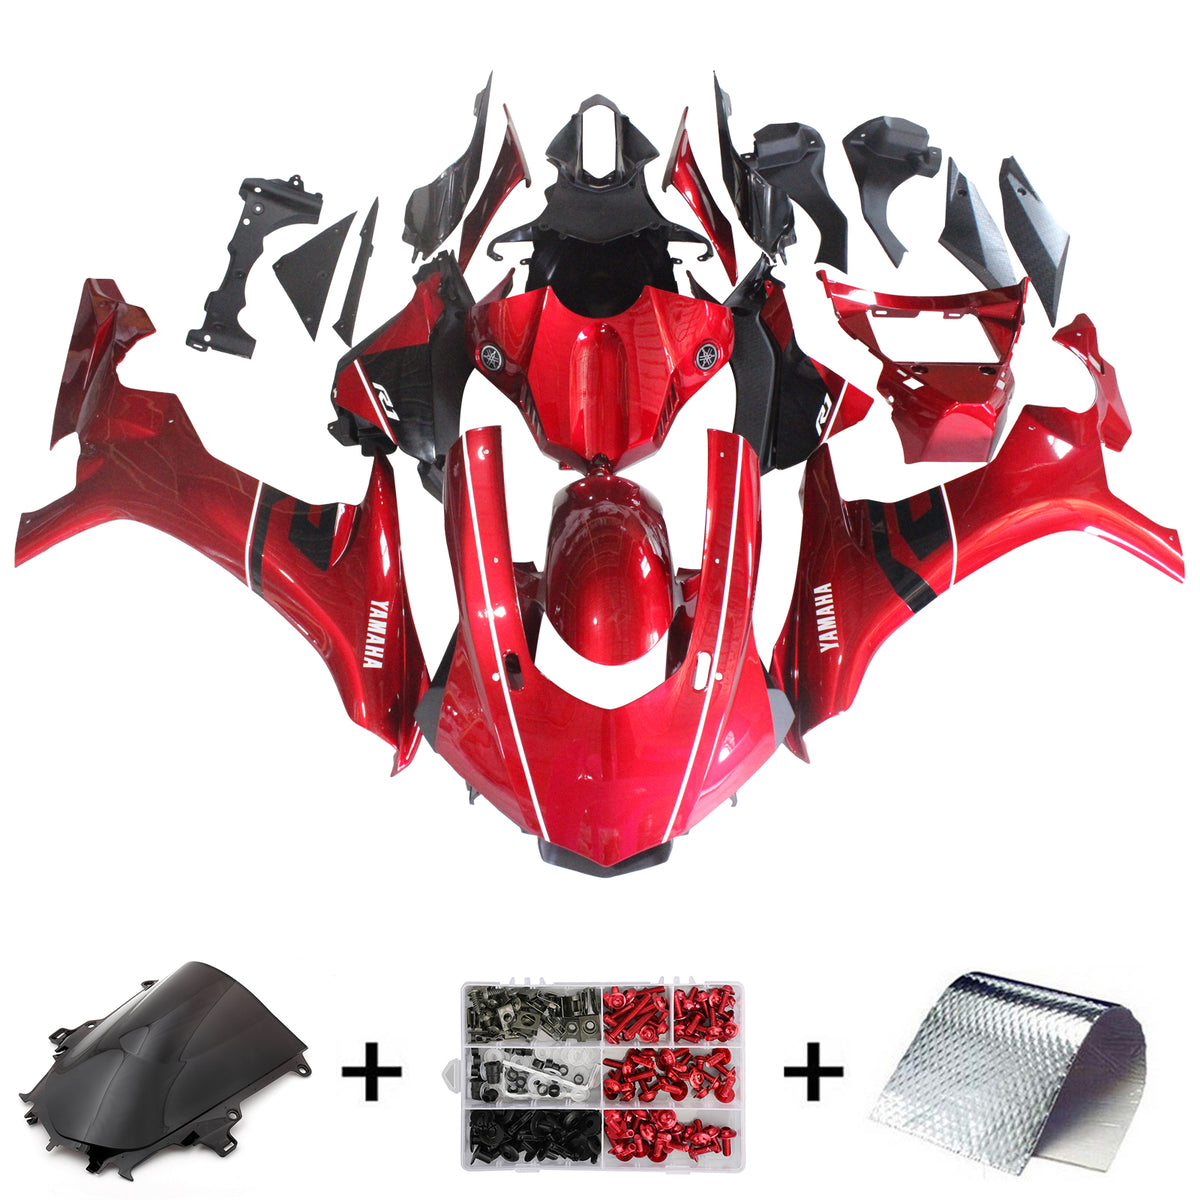 Amotopart Yamaha 2015-2019 YZF 1000 R1 Kit carena rosso scuro lucido